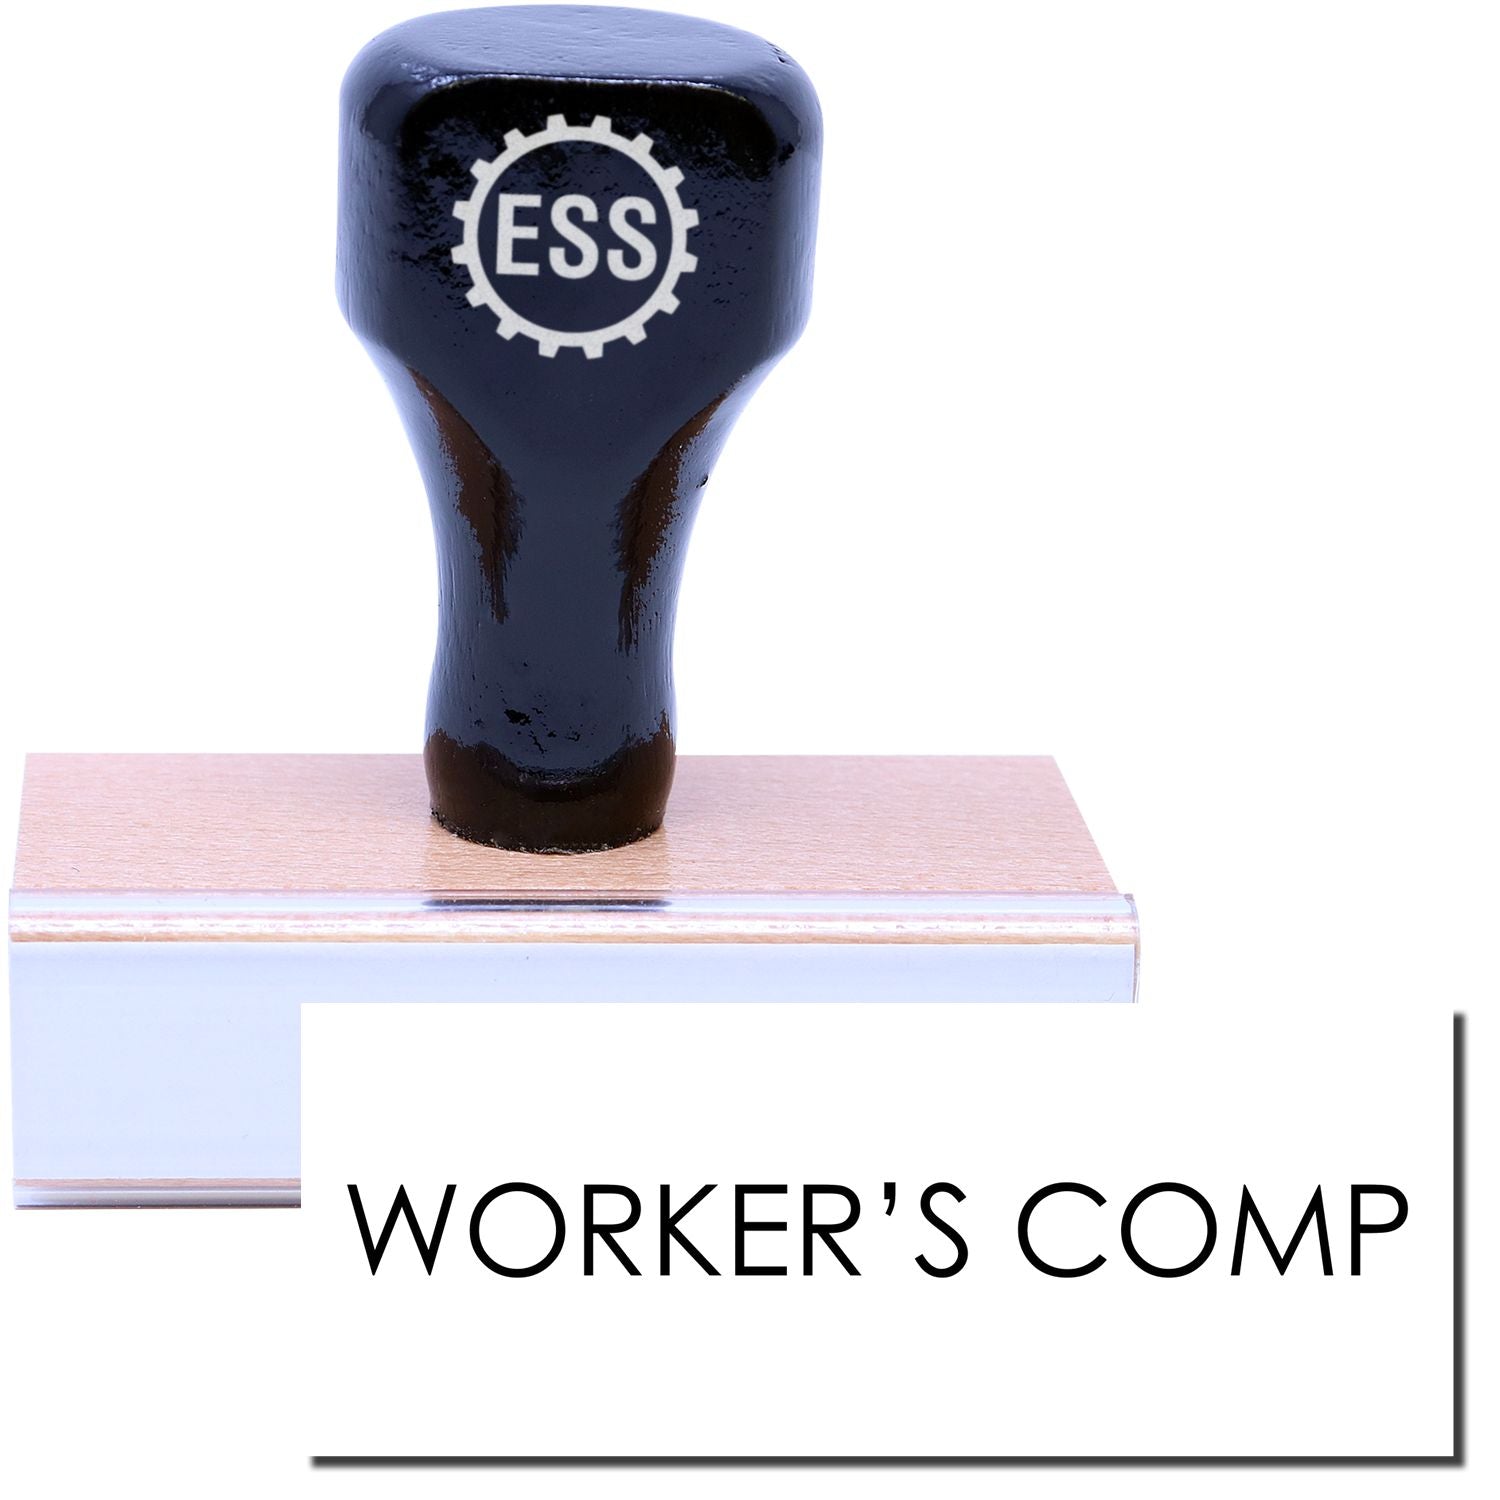 A stock office medical rubber stamp with a stamped image showing how the text "WORKER'S COMP" is displayed after stamping.